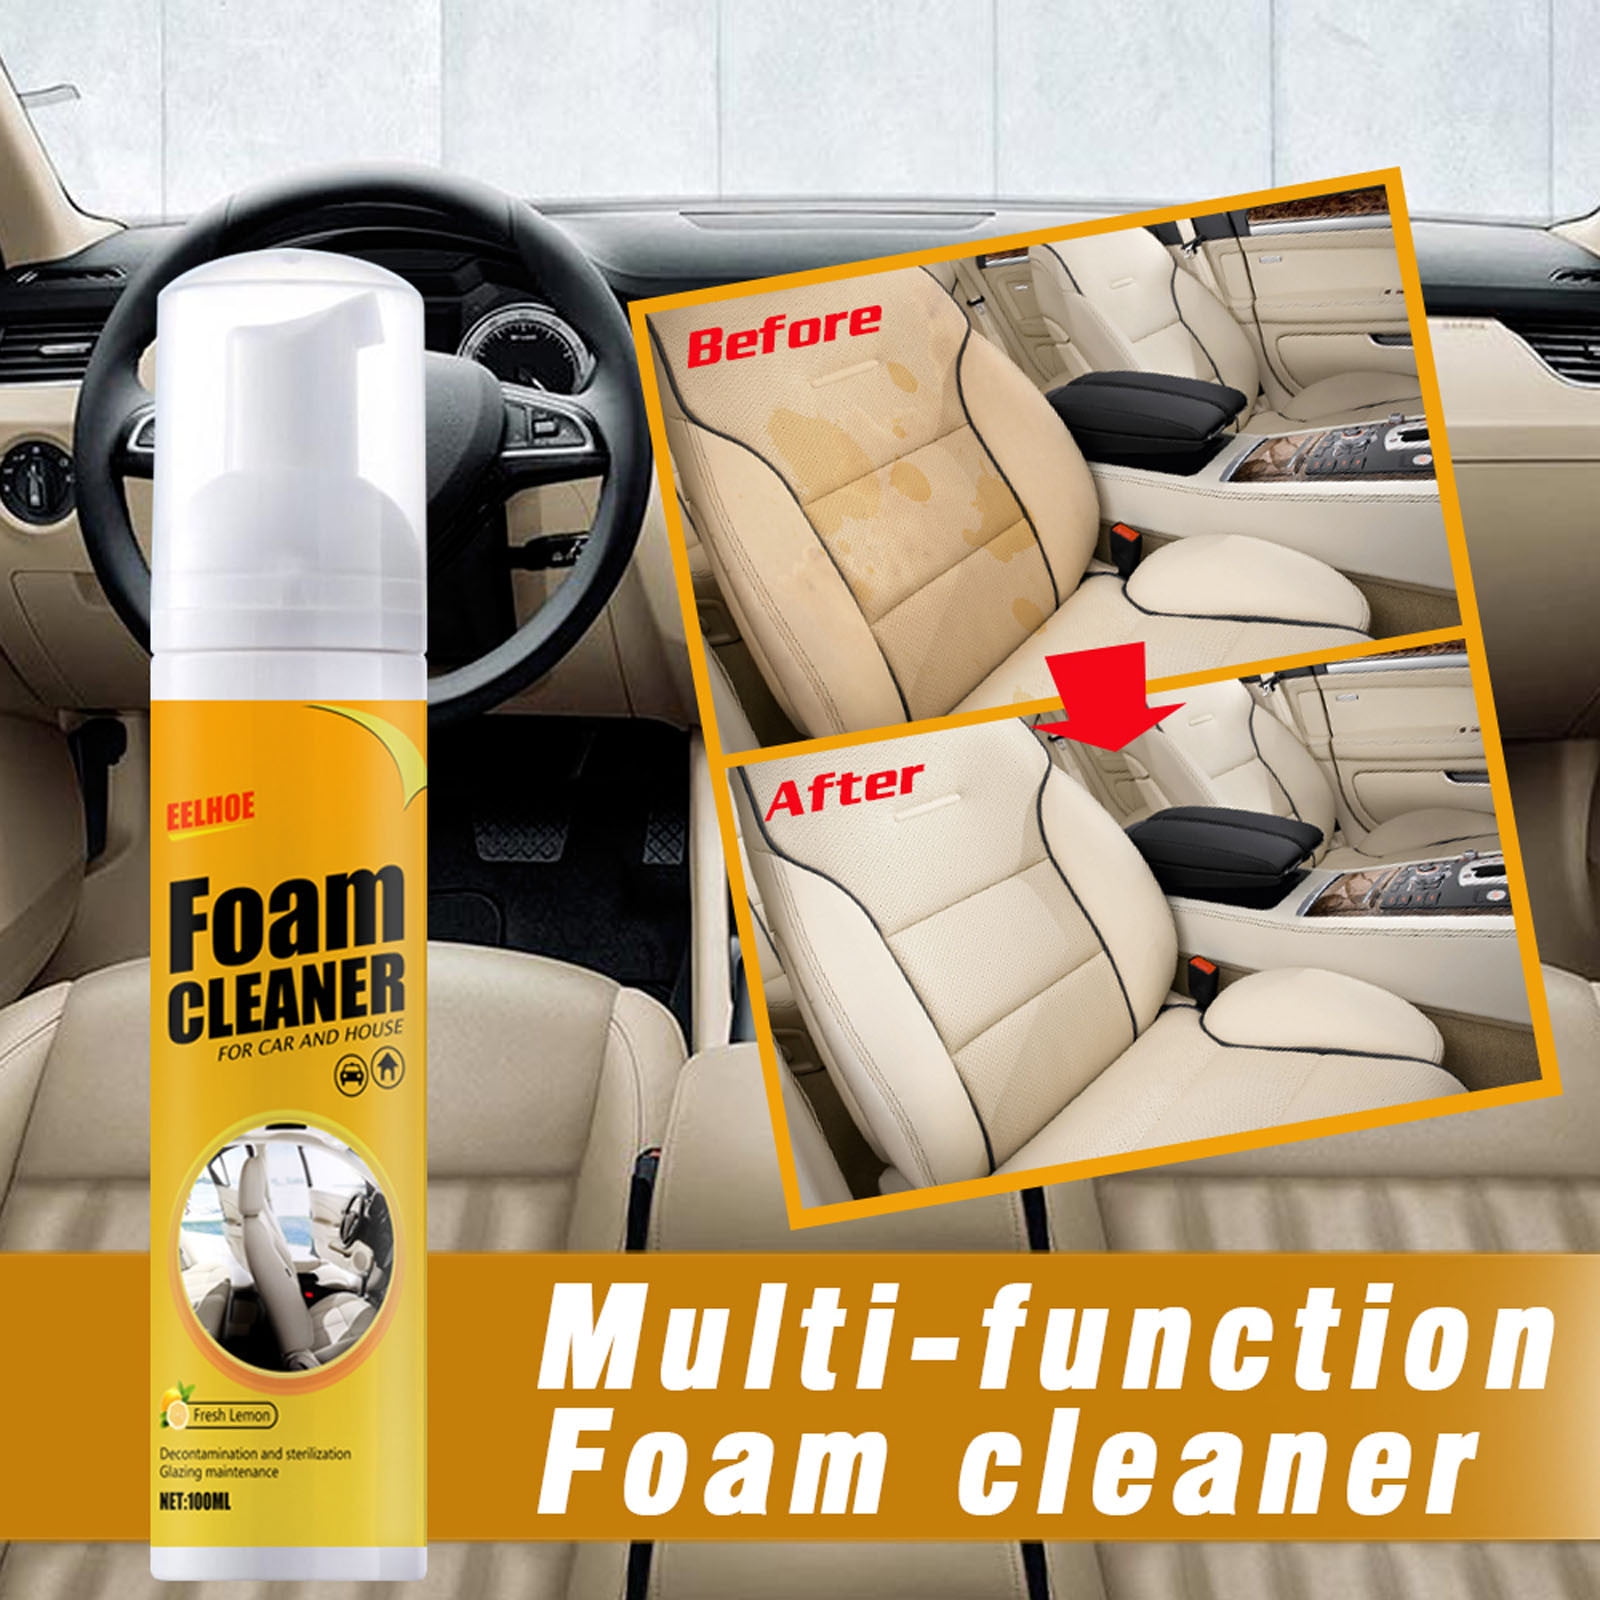 Super Cleaner Effective Car Interior Cleaner Leather Car Seat Cleaner Stain  Remover For Carpet, Upholstery, Fabric, Sofa Car Headliner Seat Cleaner